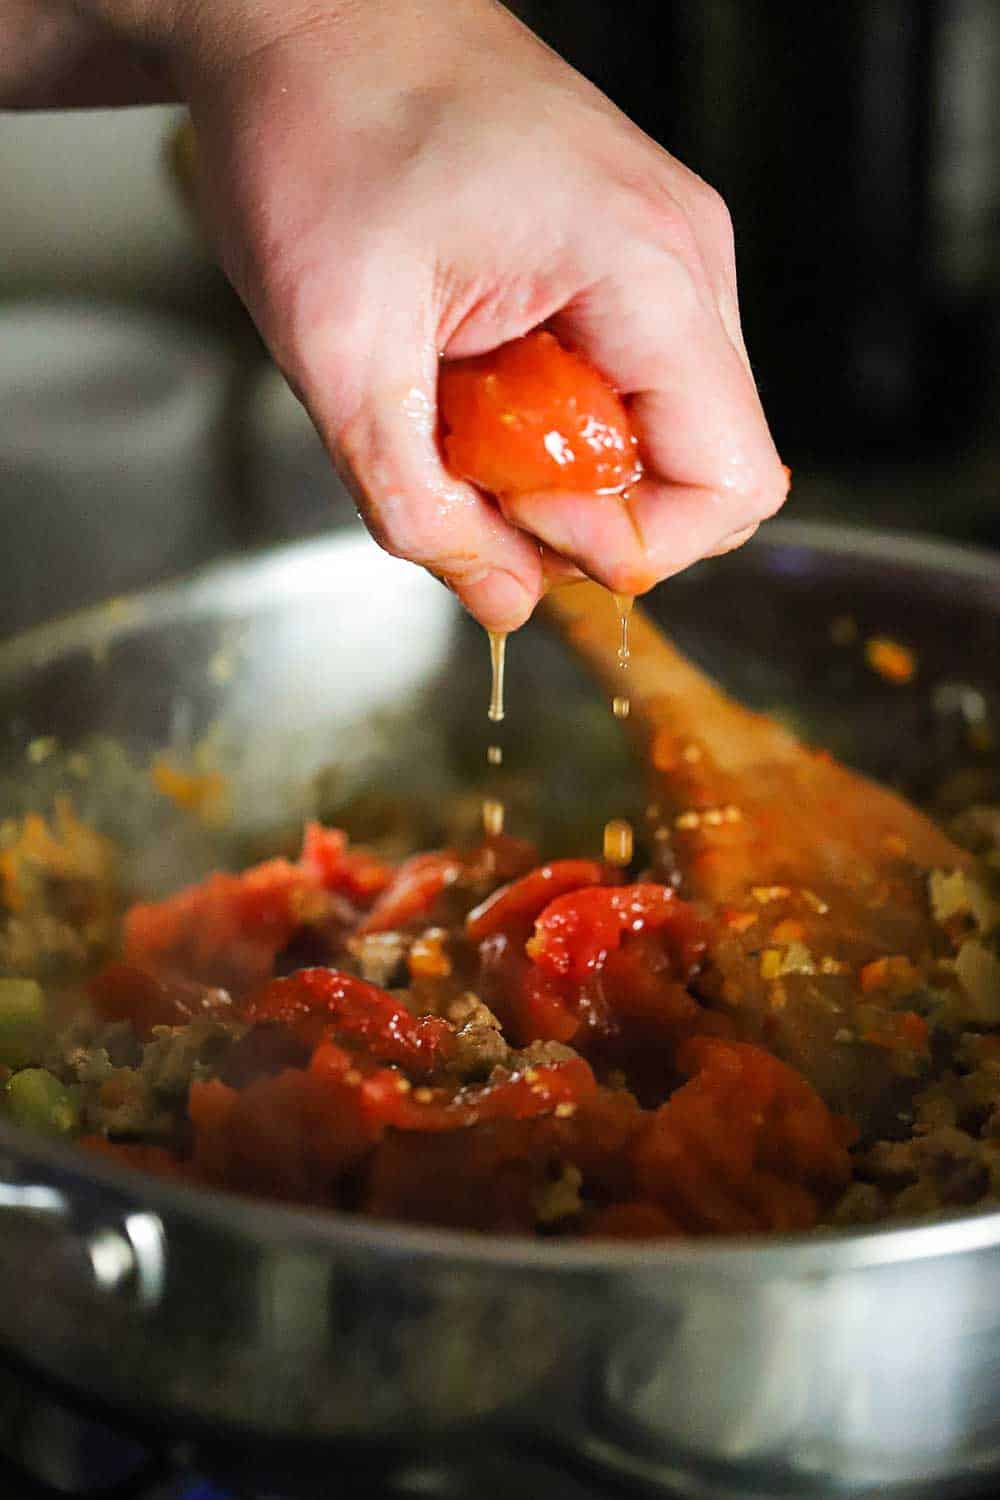 A hand squeezing a whole tomato into a skillet of sautéd vegetables.